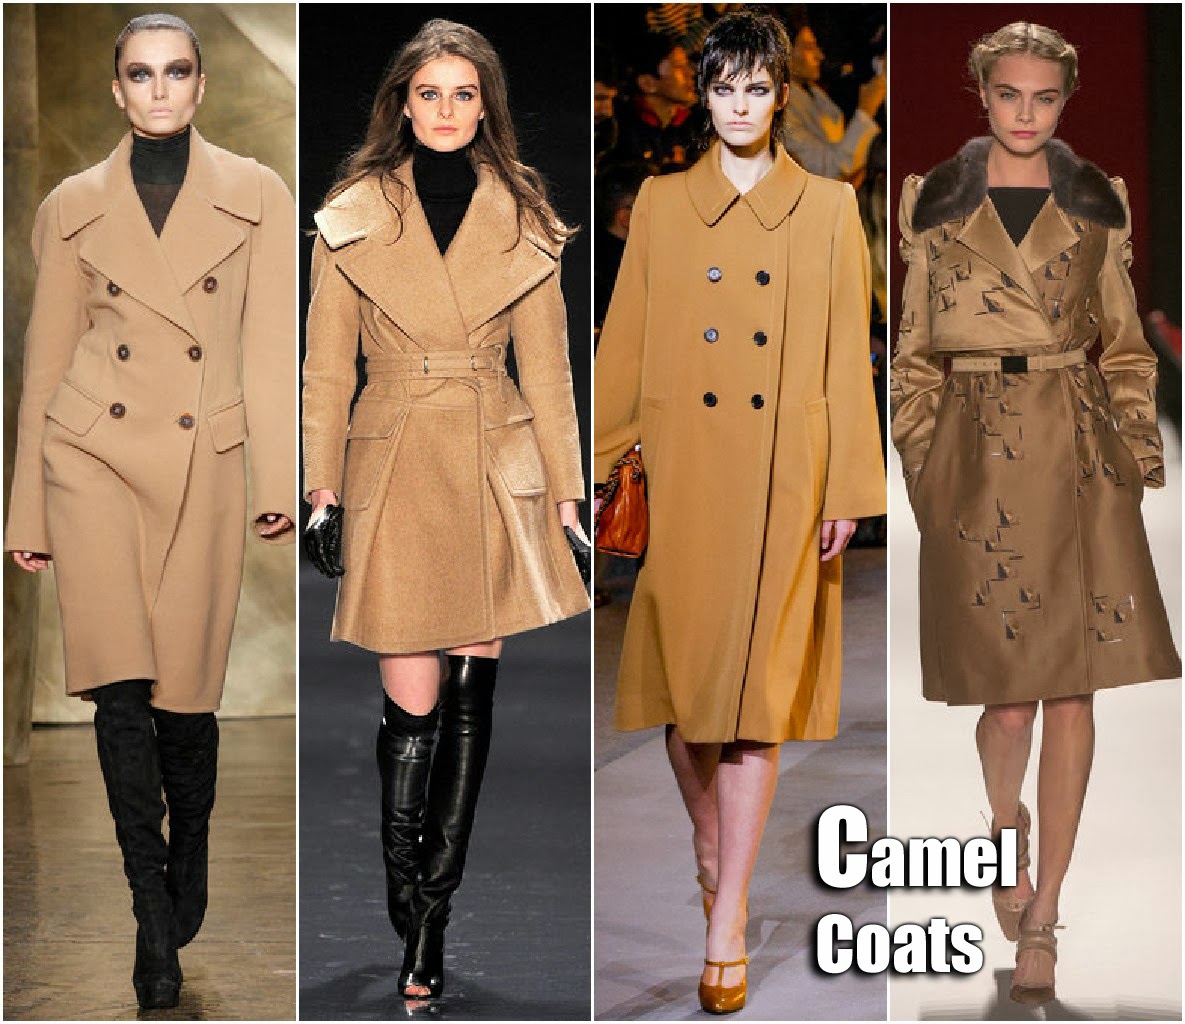 Fall 2013 trends